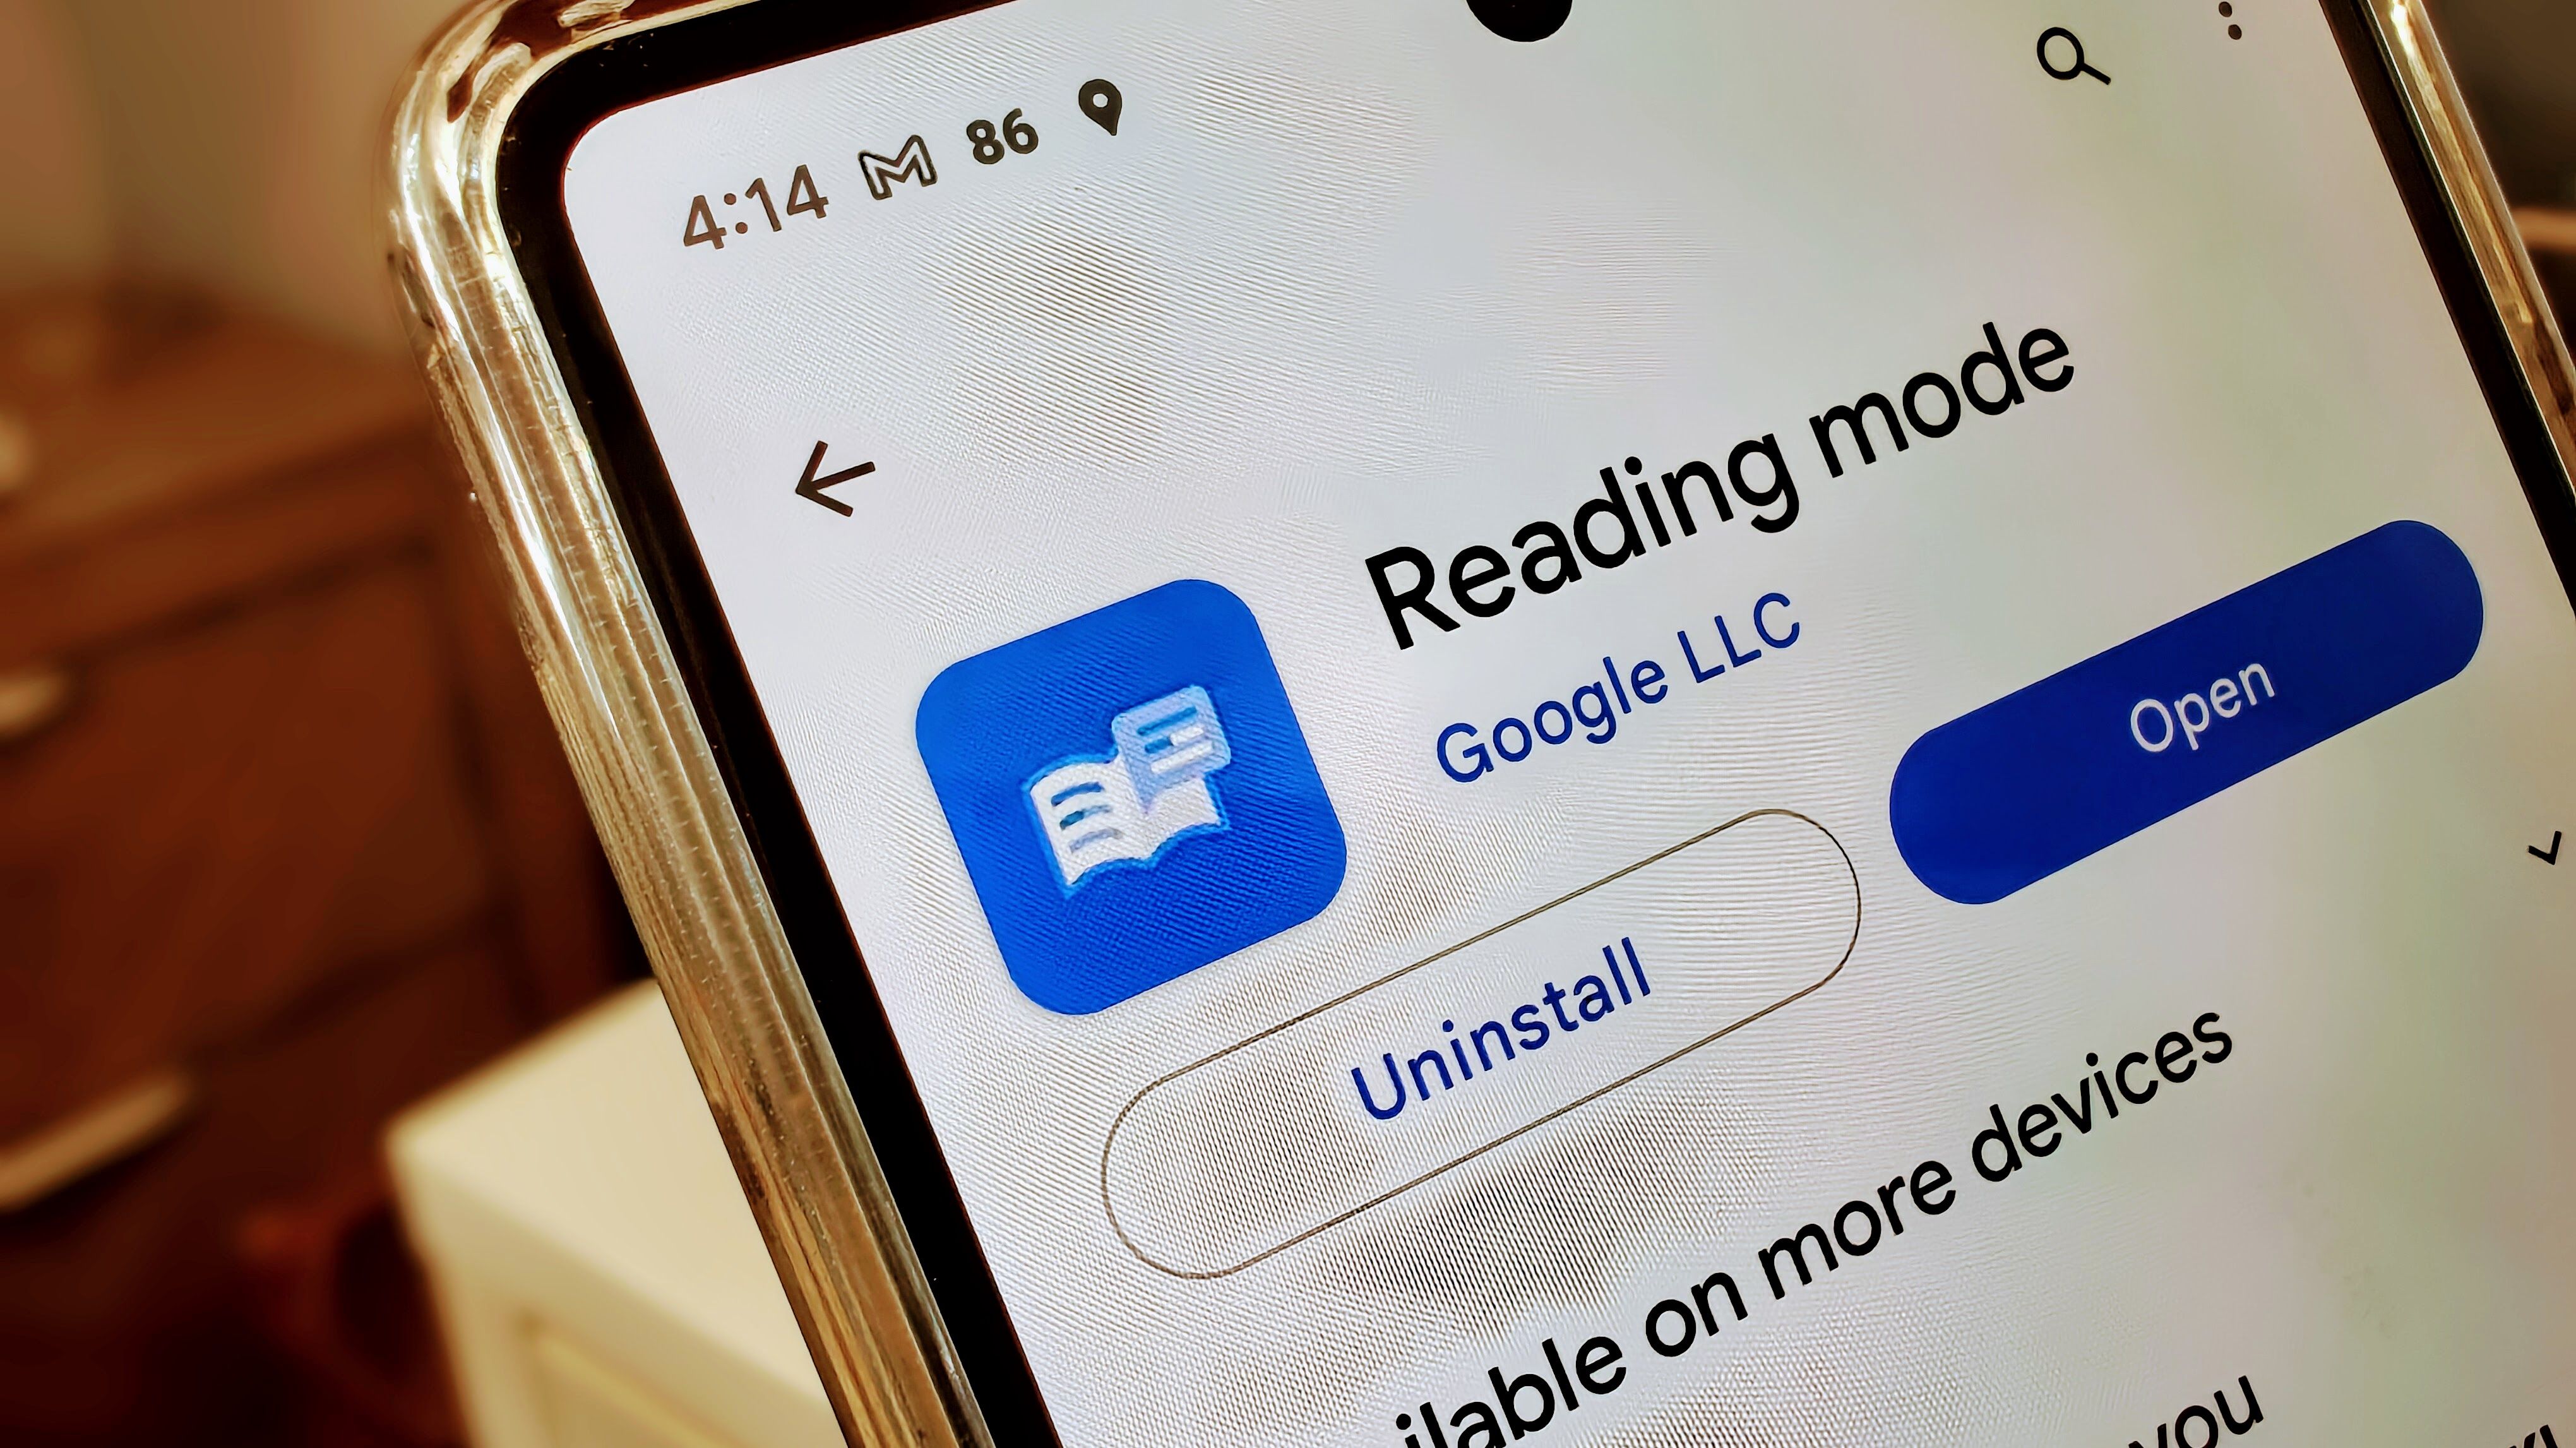 Reading Mode app in the Google Play Store.